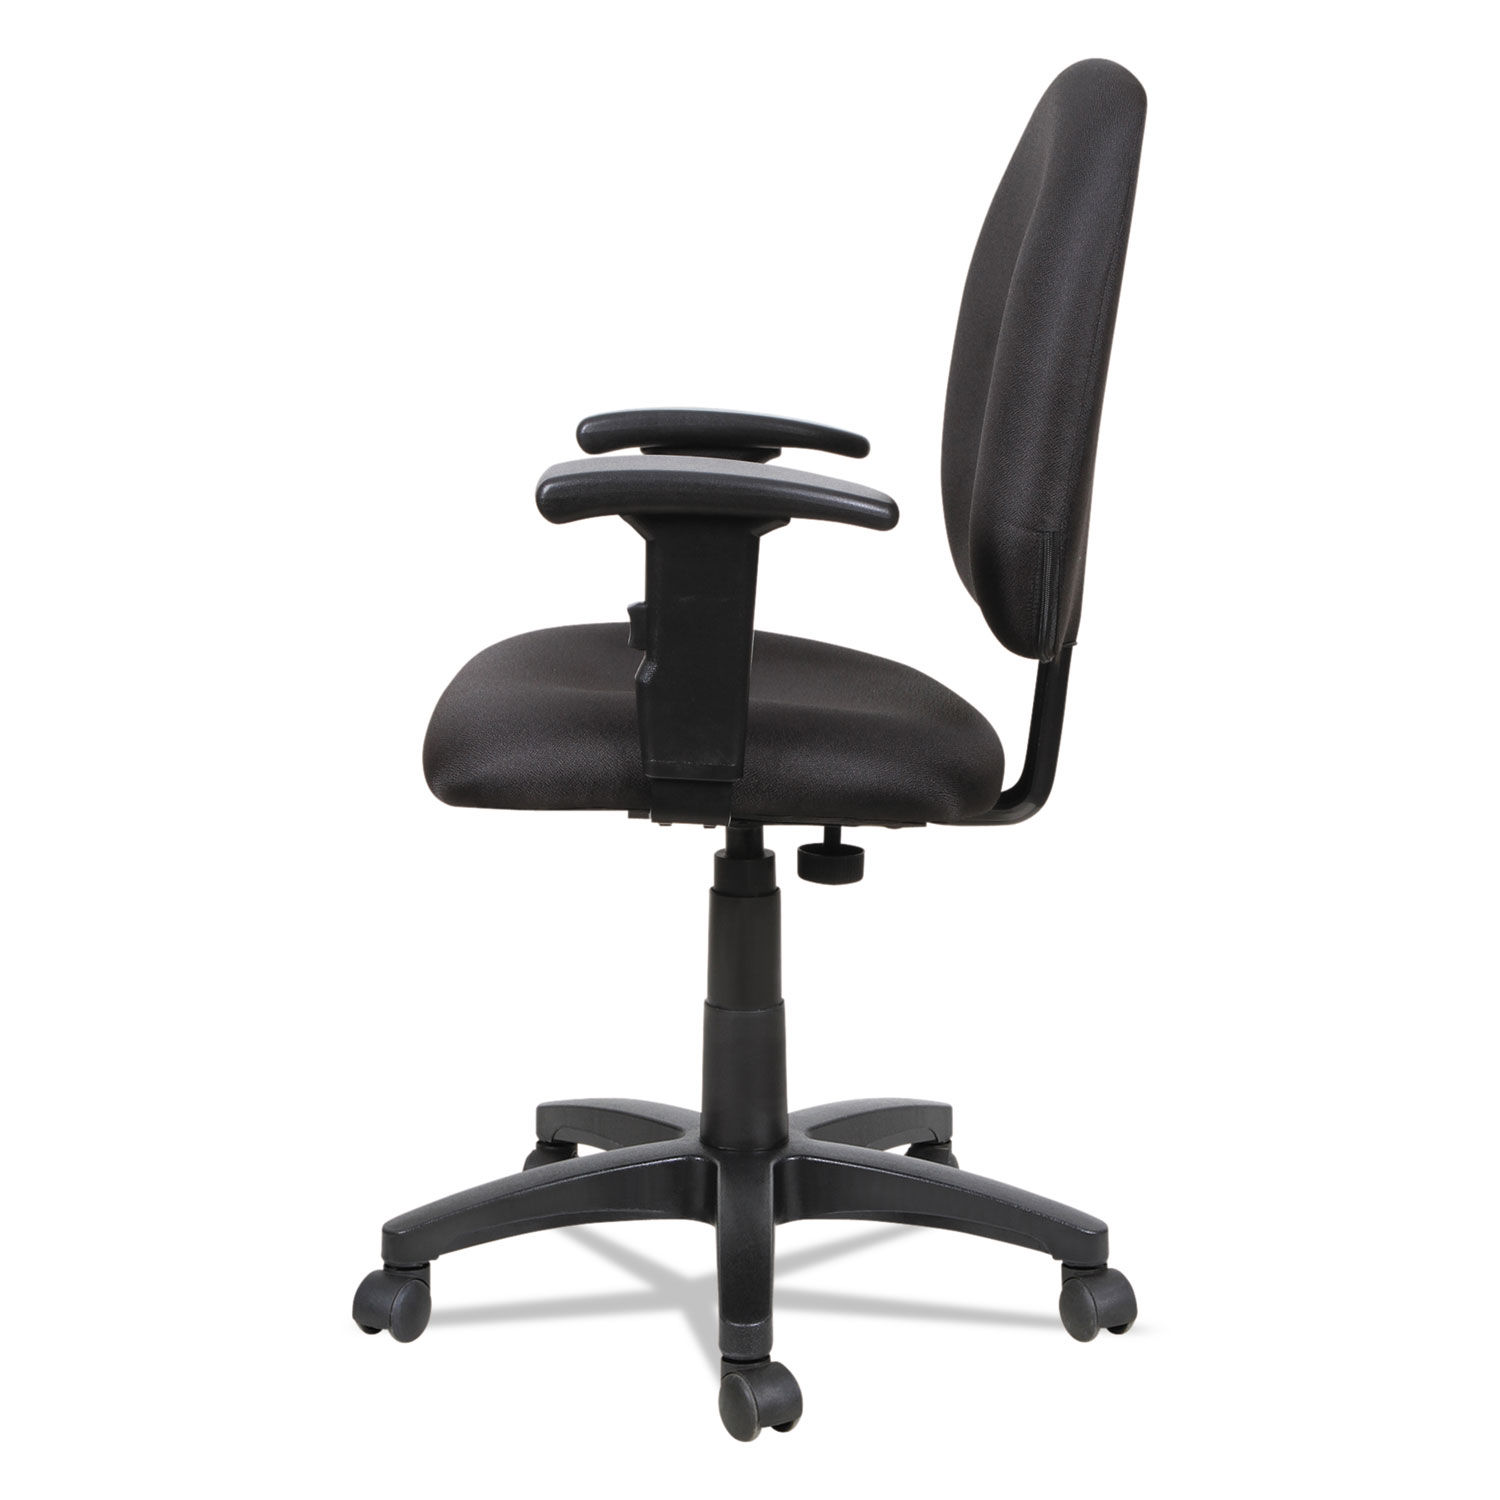 Alera Essentia Series Swivel Task Chair with Adjustable Arms Supports Up to 275 lb, 17.71" to 22.44" Seat Height, Black